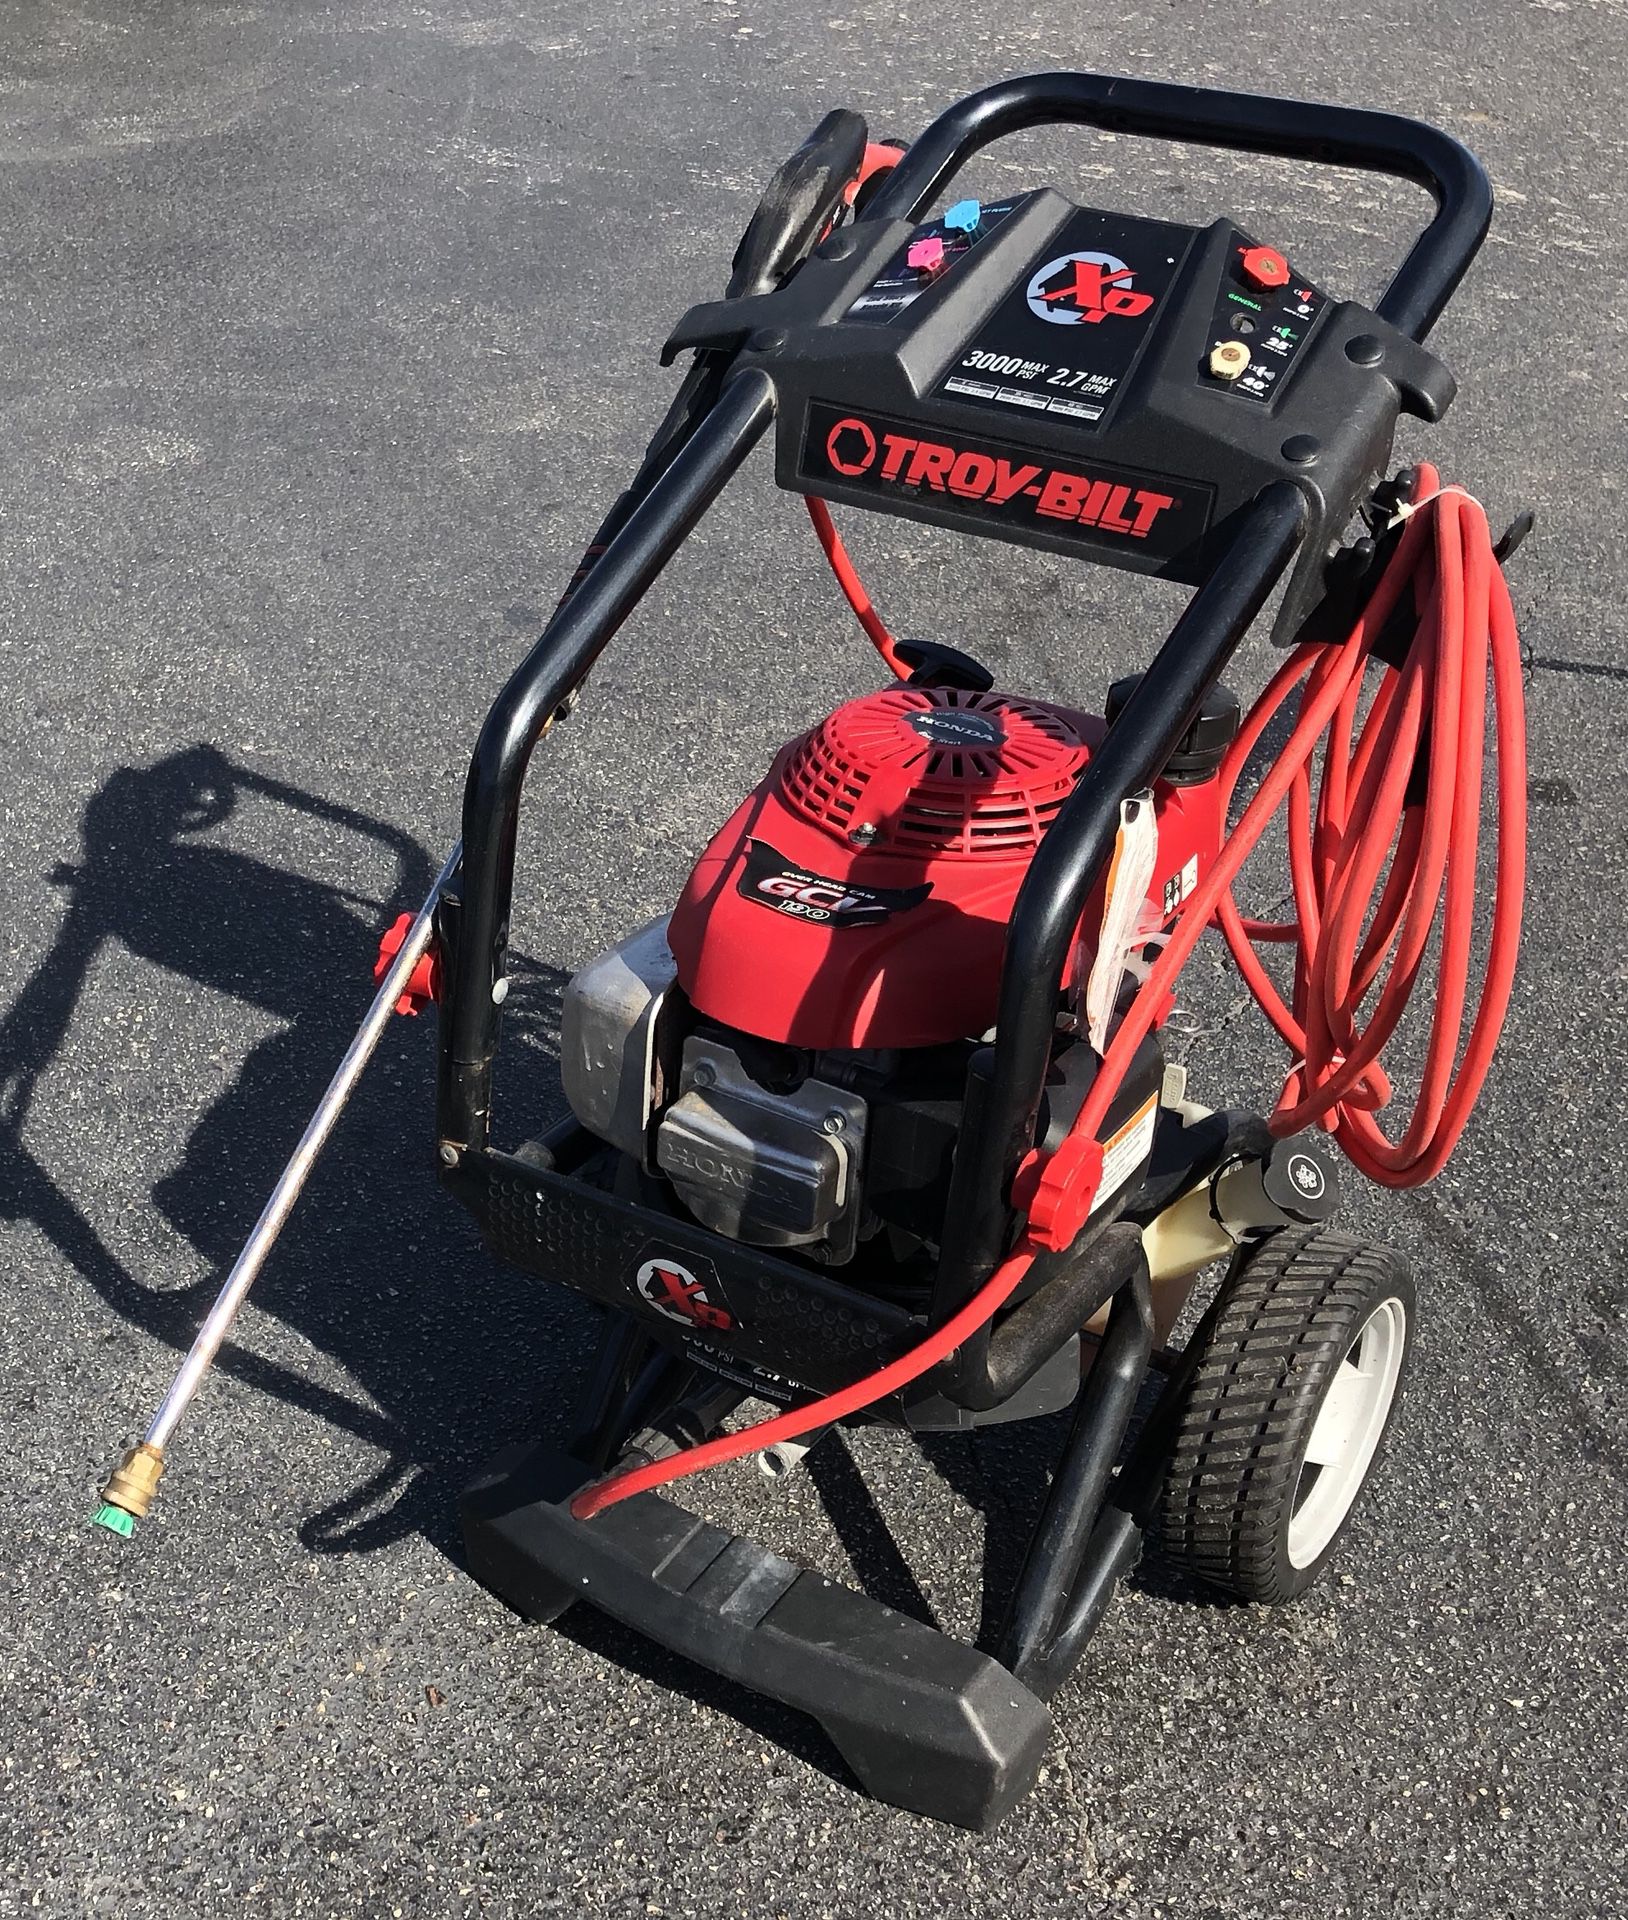 Troy Bilt XP 3000 PSI - 2.7 GPM Carb Compliant Cold Water Gas Pressure Washer - Powered Honda GCV 190 Engine - EXCELLENT CONDITION